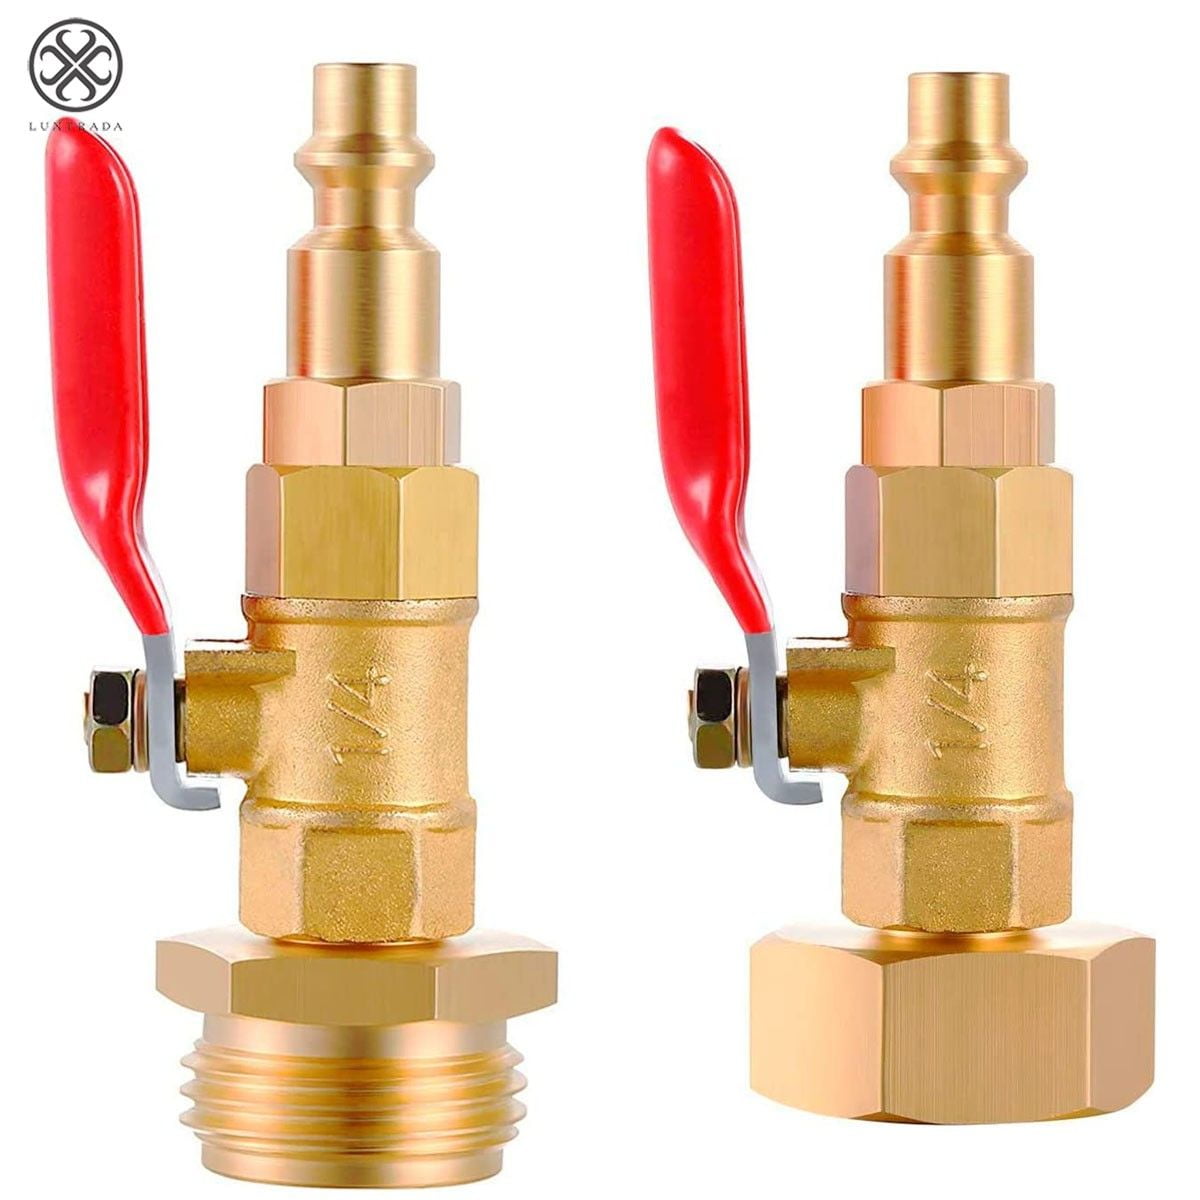 Winterize Blowout Adapter with 1/4 Inch Male Quick Connecting Plug and 3/4 Inch Male GHT Thread Brass Made Winterizing Quick Adapter with Ball Valve Easy Blow Out Water to Winterize 